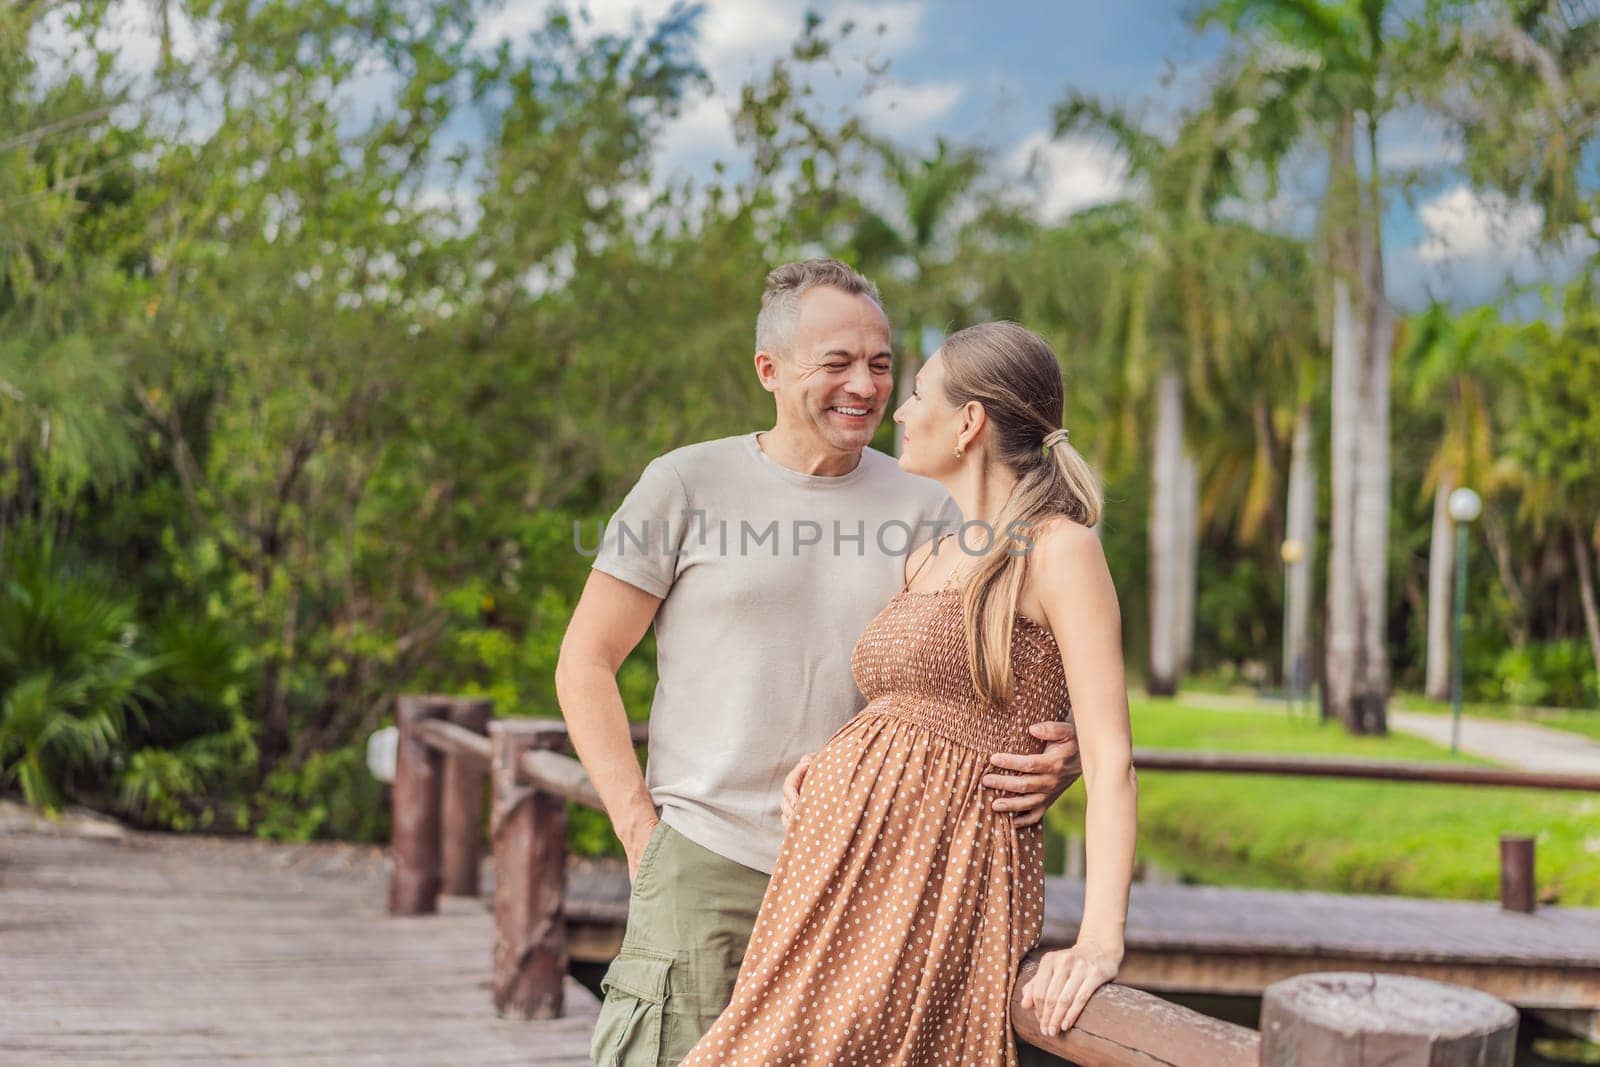 A happy, mature couple over 40, enjoying a leisurely walk in a park, their joy evident as they embrace the journey of pregnancy later in life.